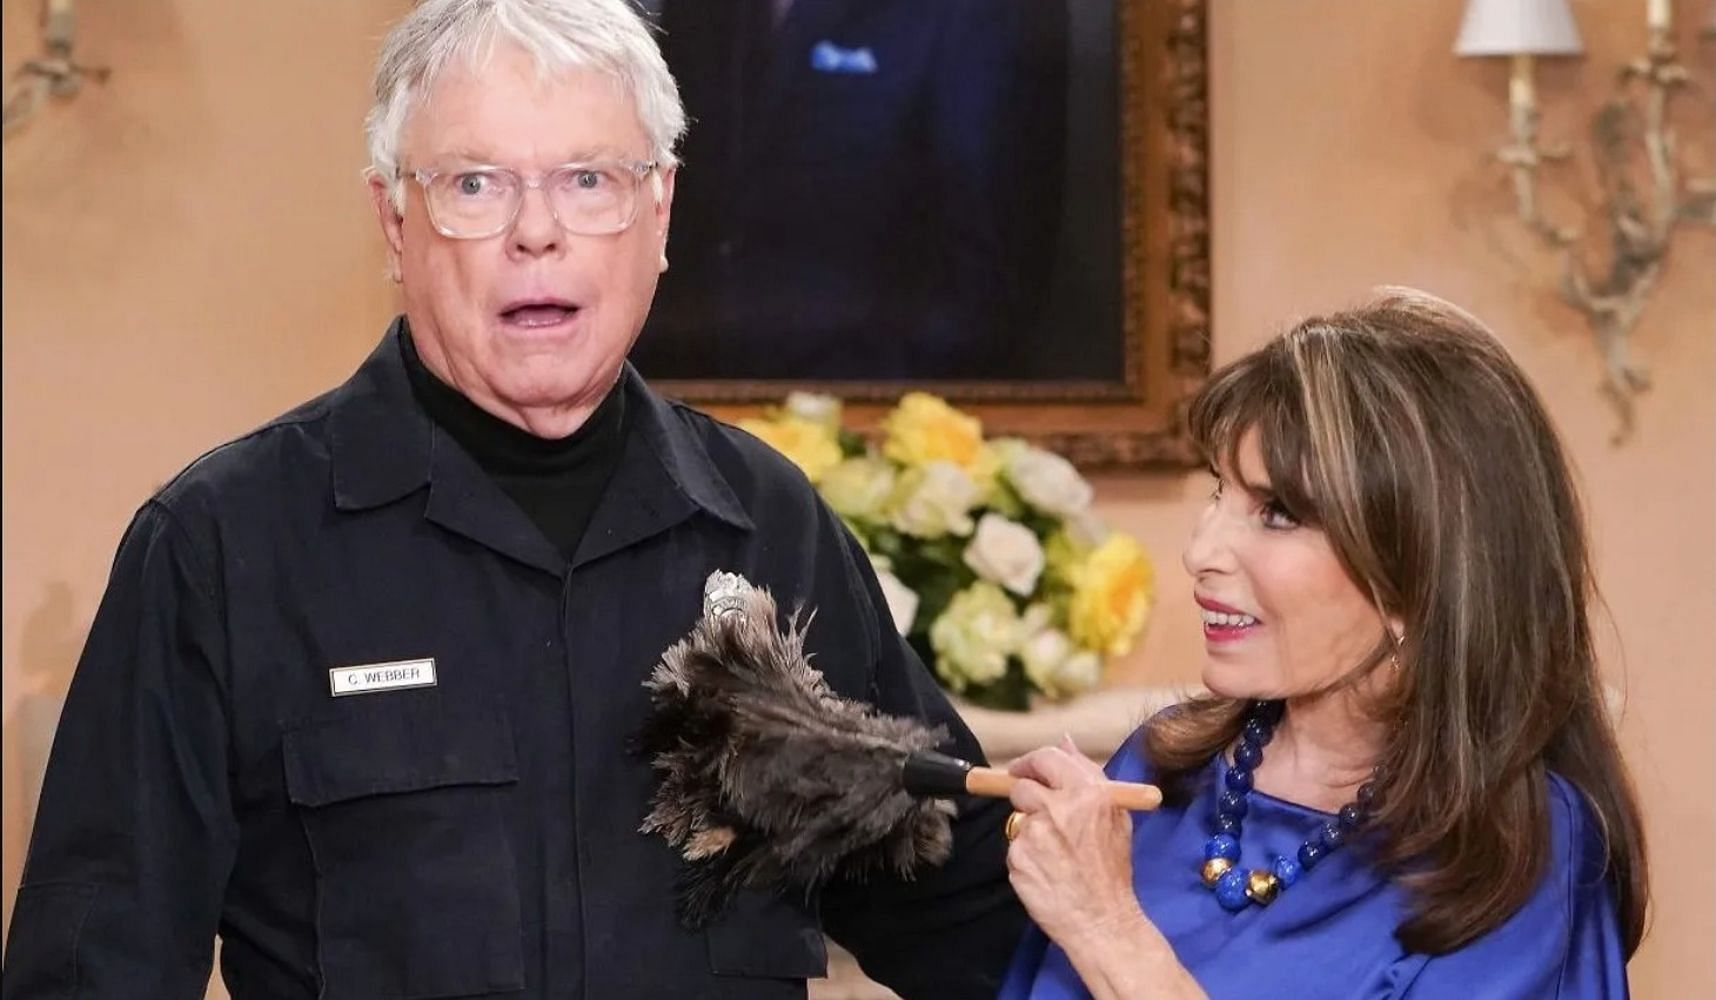 Charlie and Esther might be the newest couple on the show (Image via CBS)